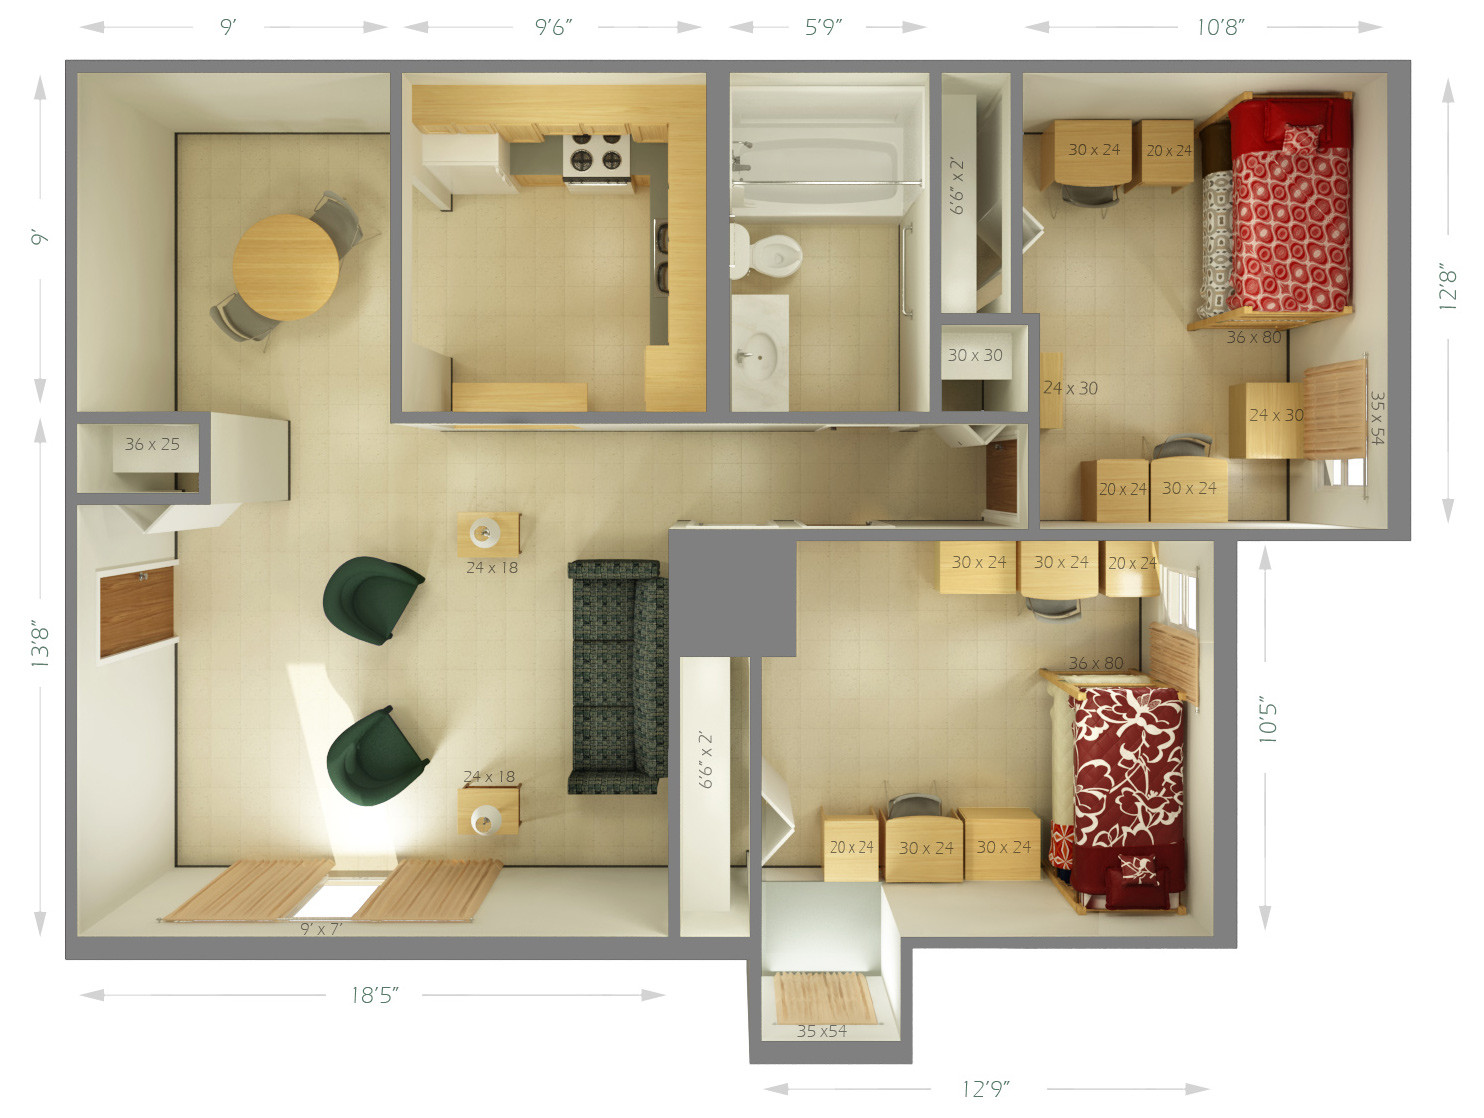 Small Bedroom Dimensions
 University Housing Cougar Village Room Dimensions